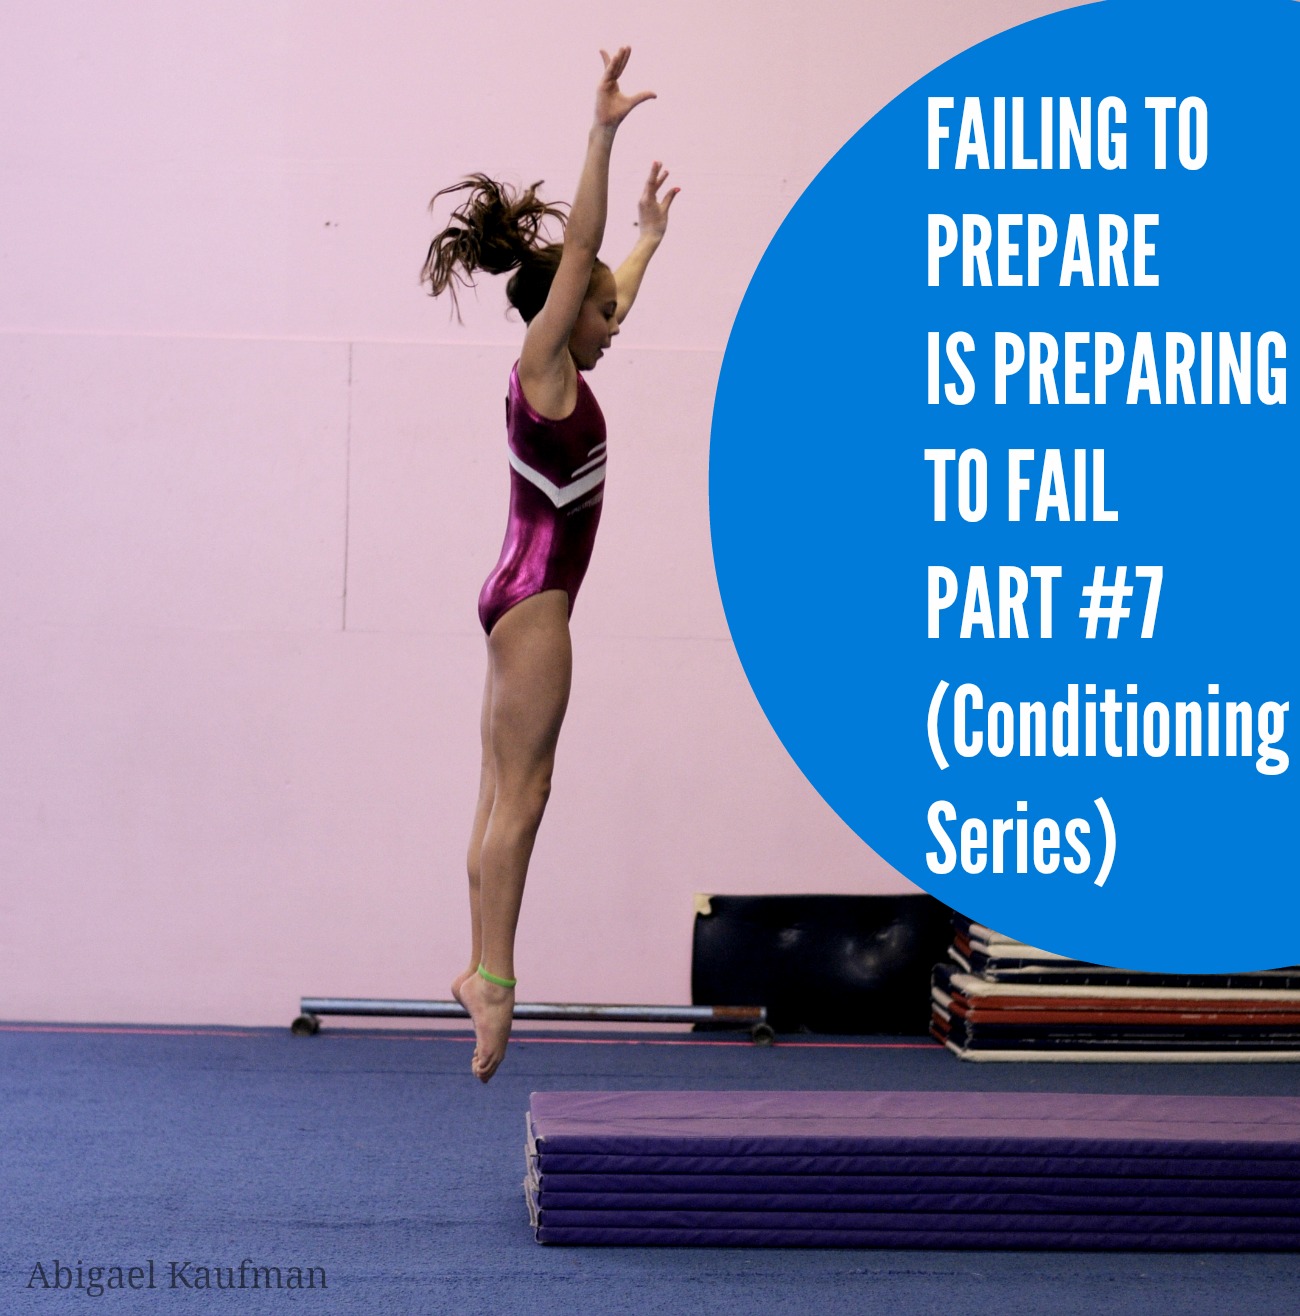 Failing to prepare is preparing to fail - conditioning series - part #7